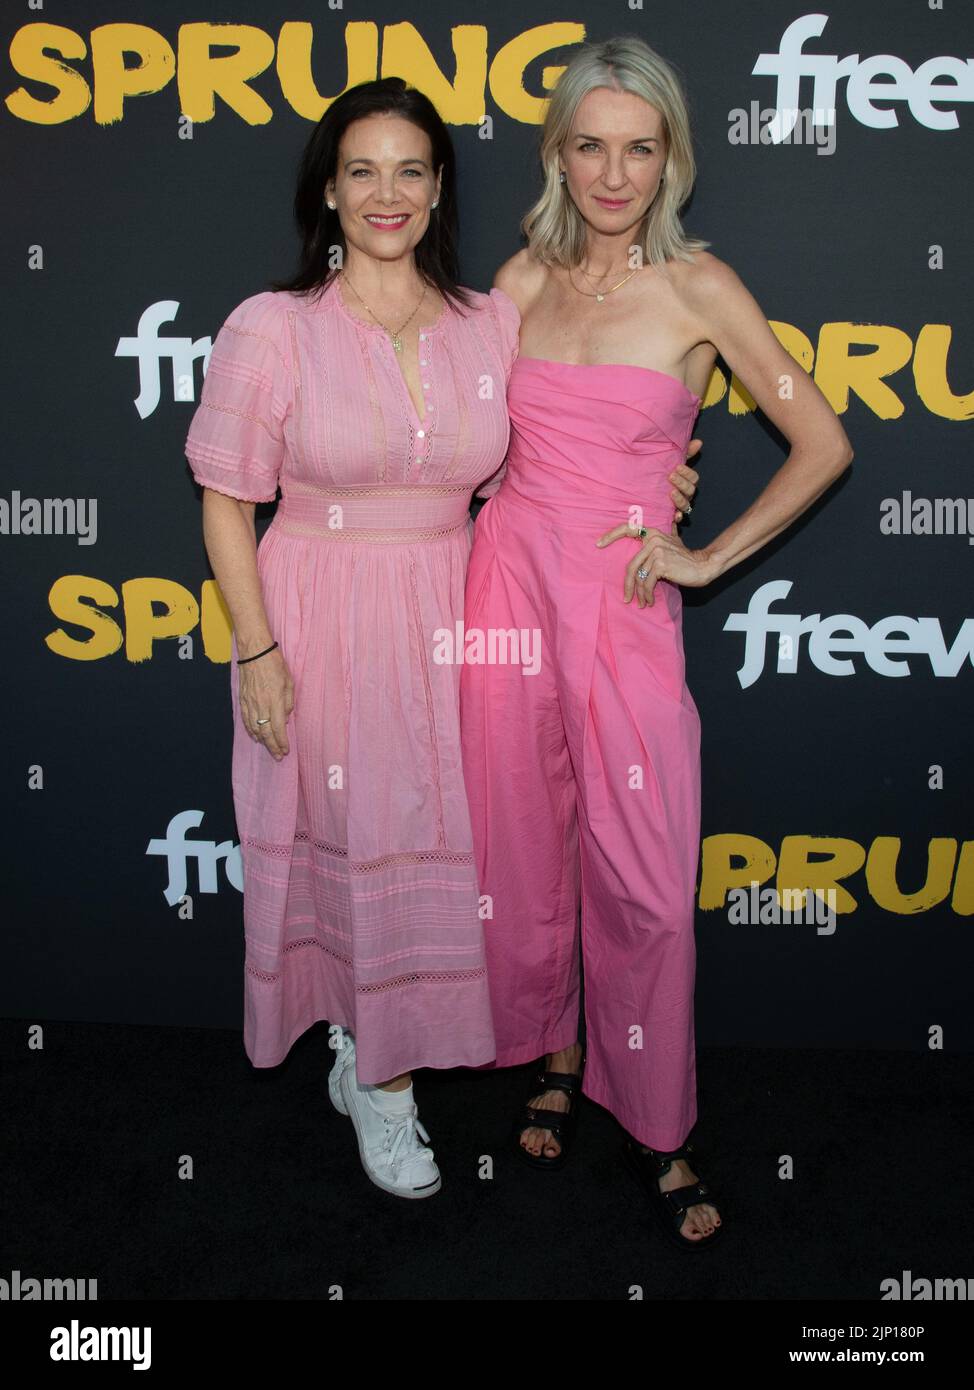 Los Angeles, California, USA. 14th Aug, 2022. Meredith Salenger and Ever Carradine. Red Carpet Premiere Of Amazon Freevee's 'Sprung'. Credit: Billy Bennight/AdMedia/Newscom/Alamy Live News Stock Photo